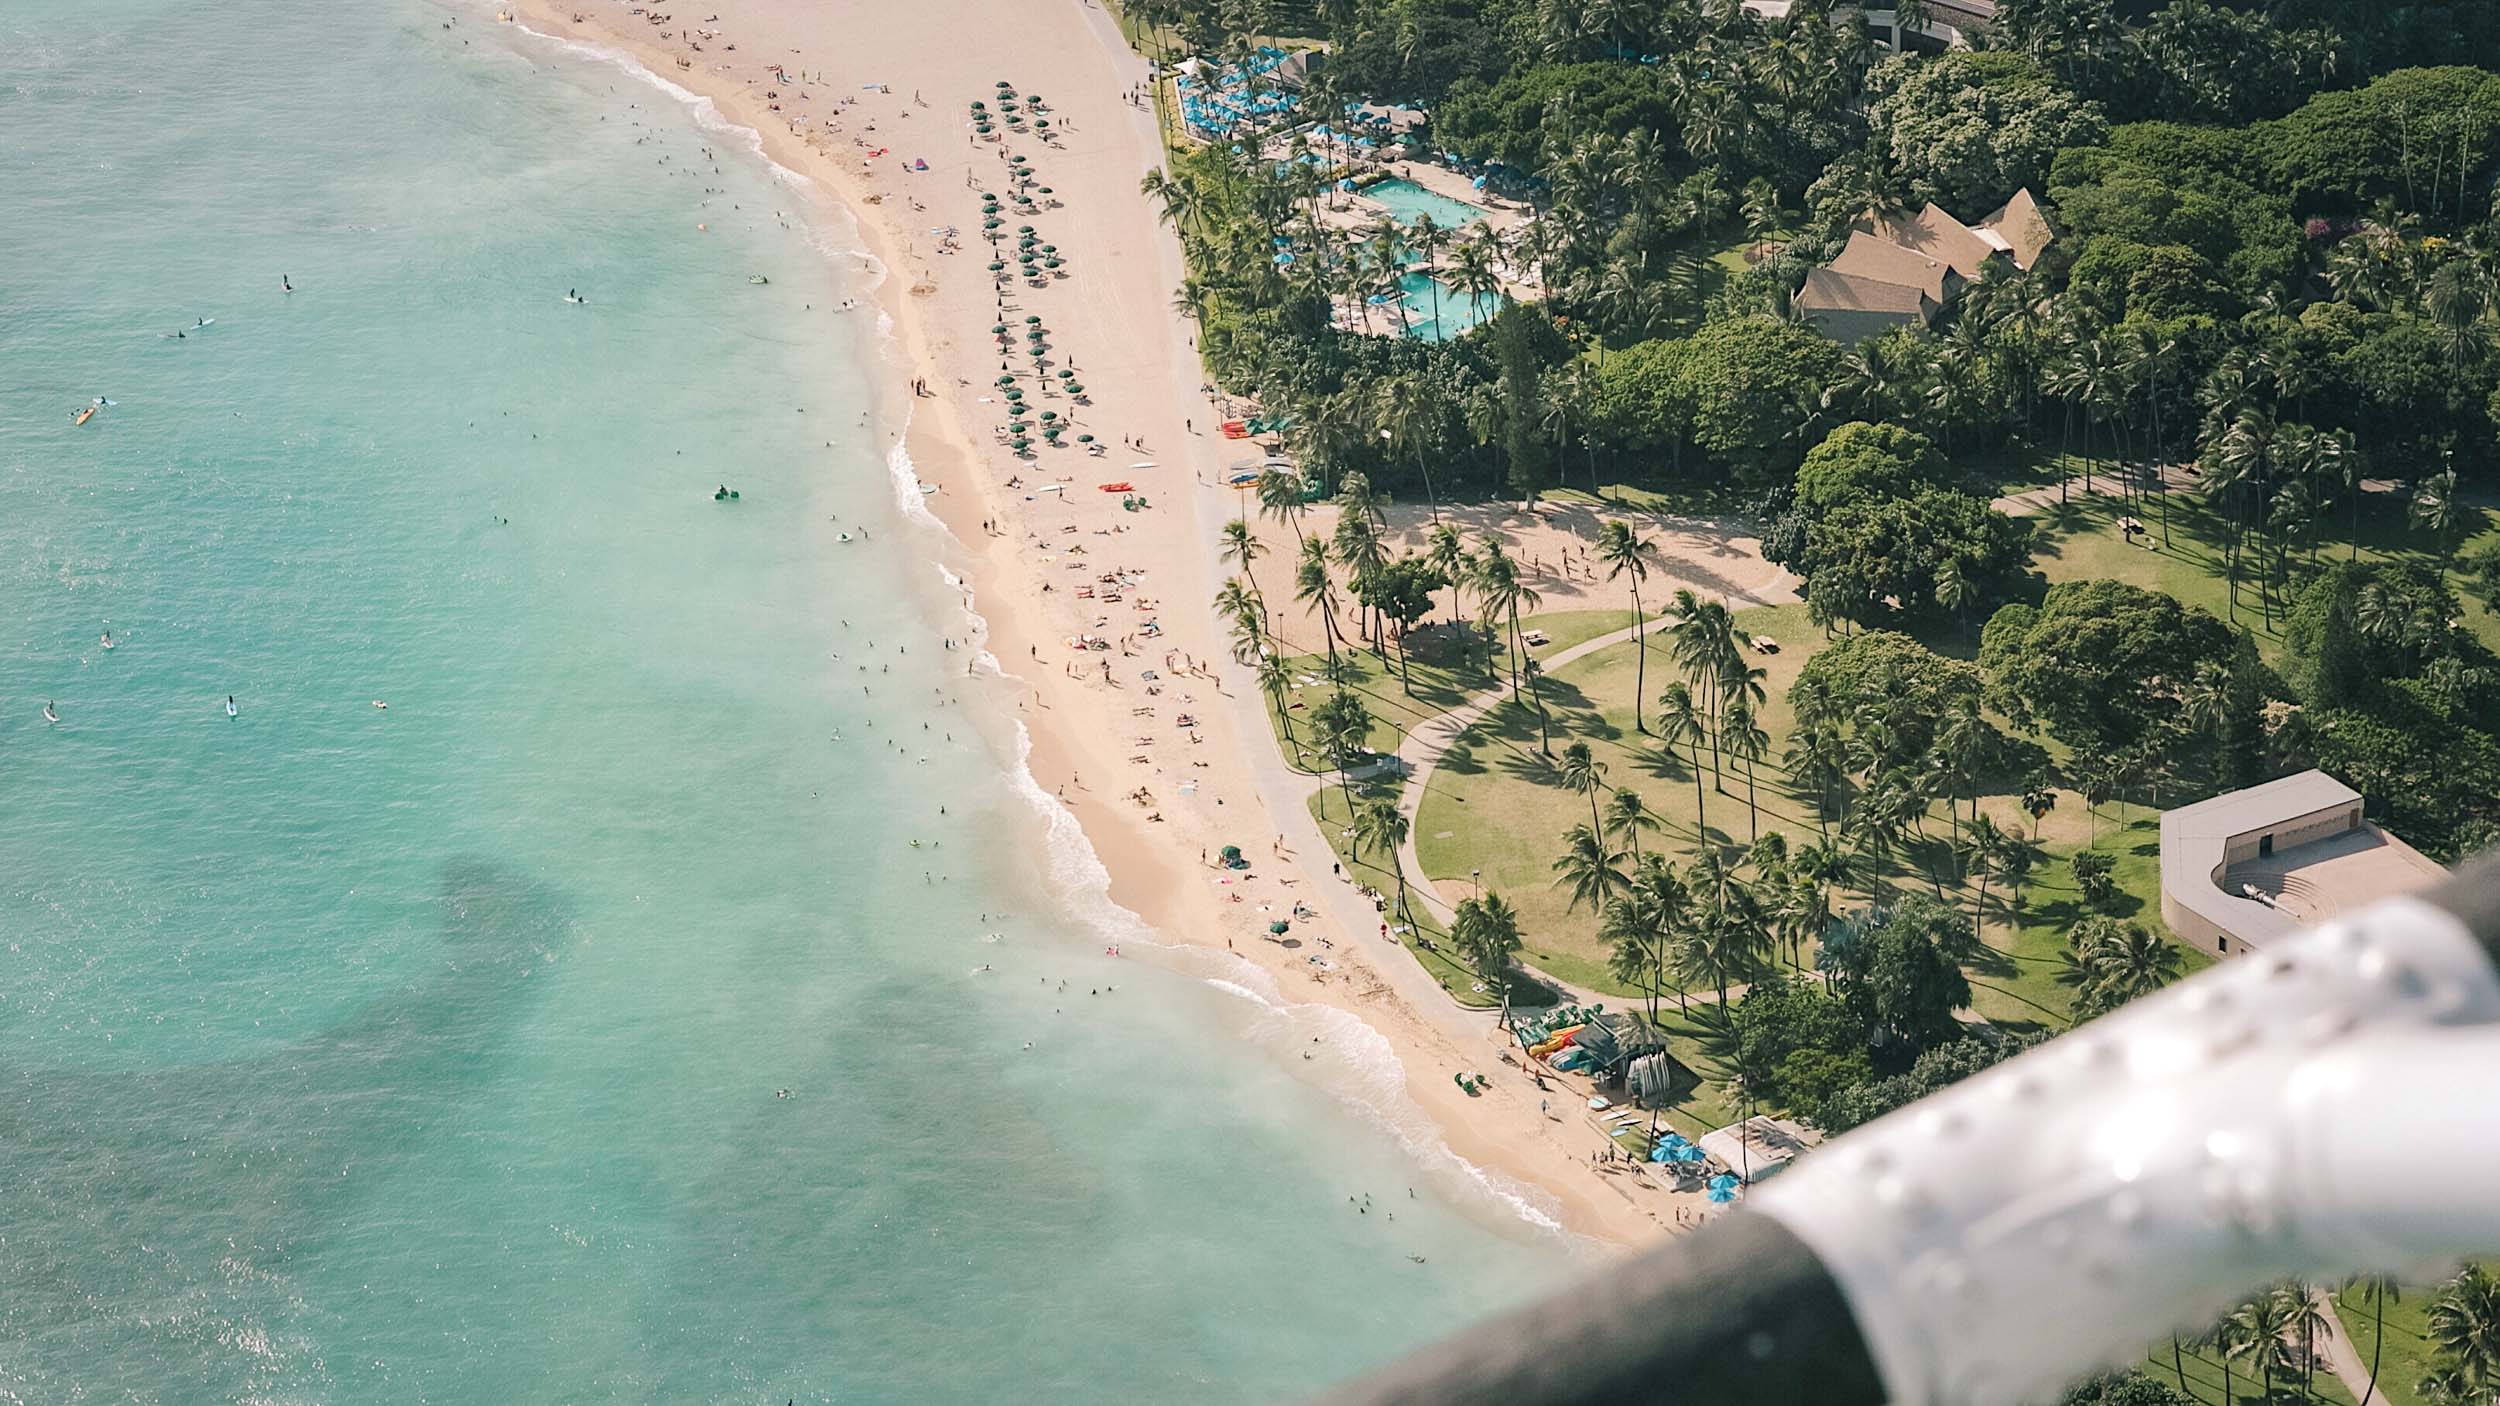 Oahu is home to Honolulu, which is the state’s capital and a city you’ve likely heard of before.  In Honolulu is Waikiki, famous for Waikiki beach and being a tourist hot spot!